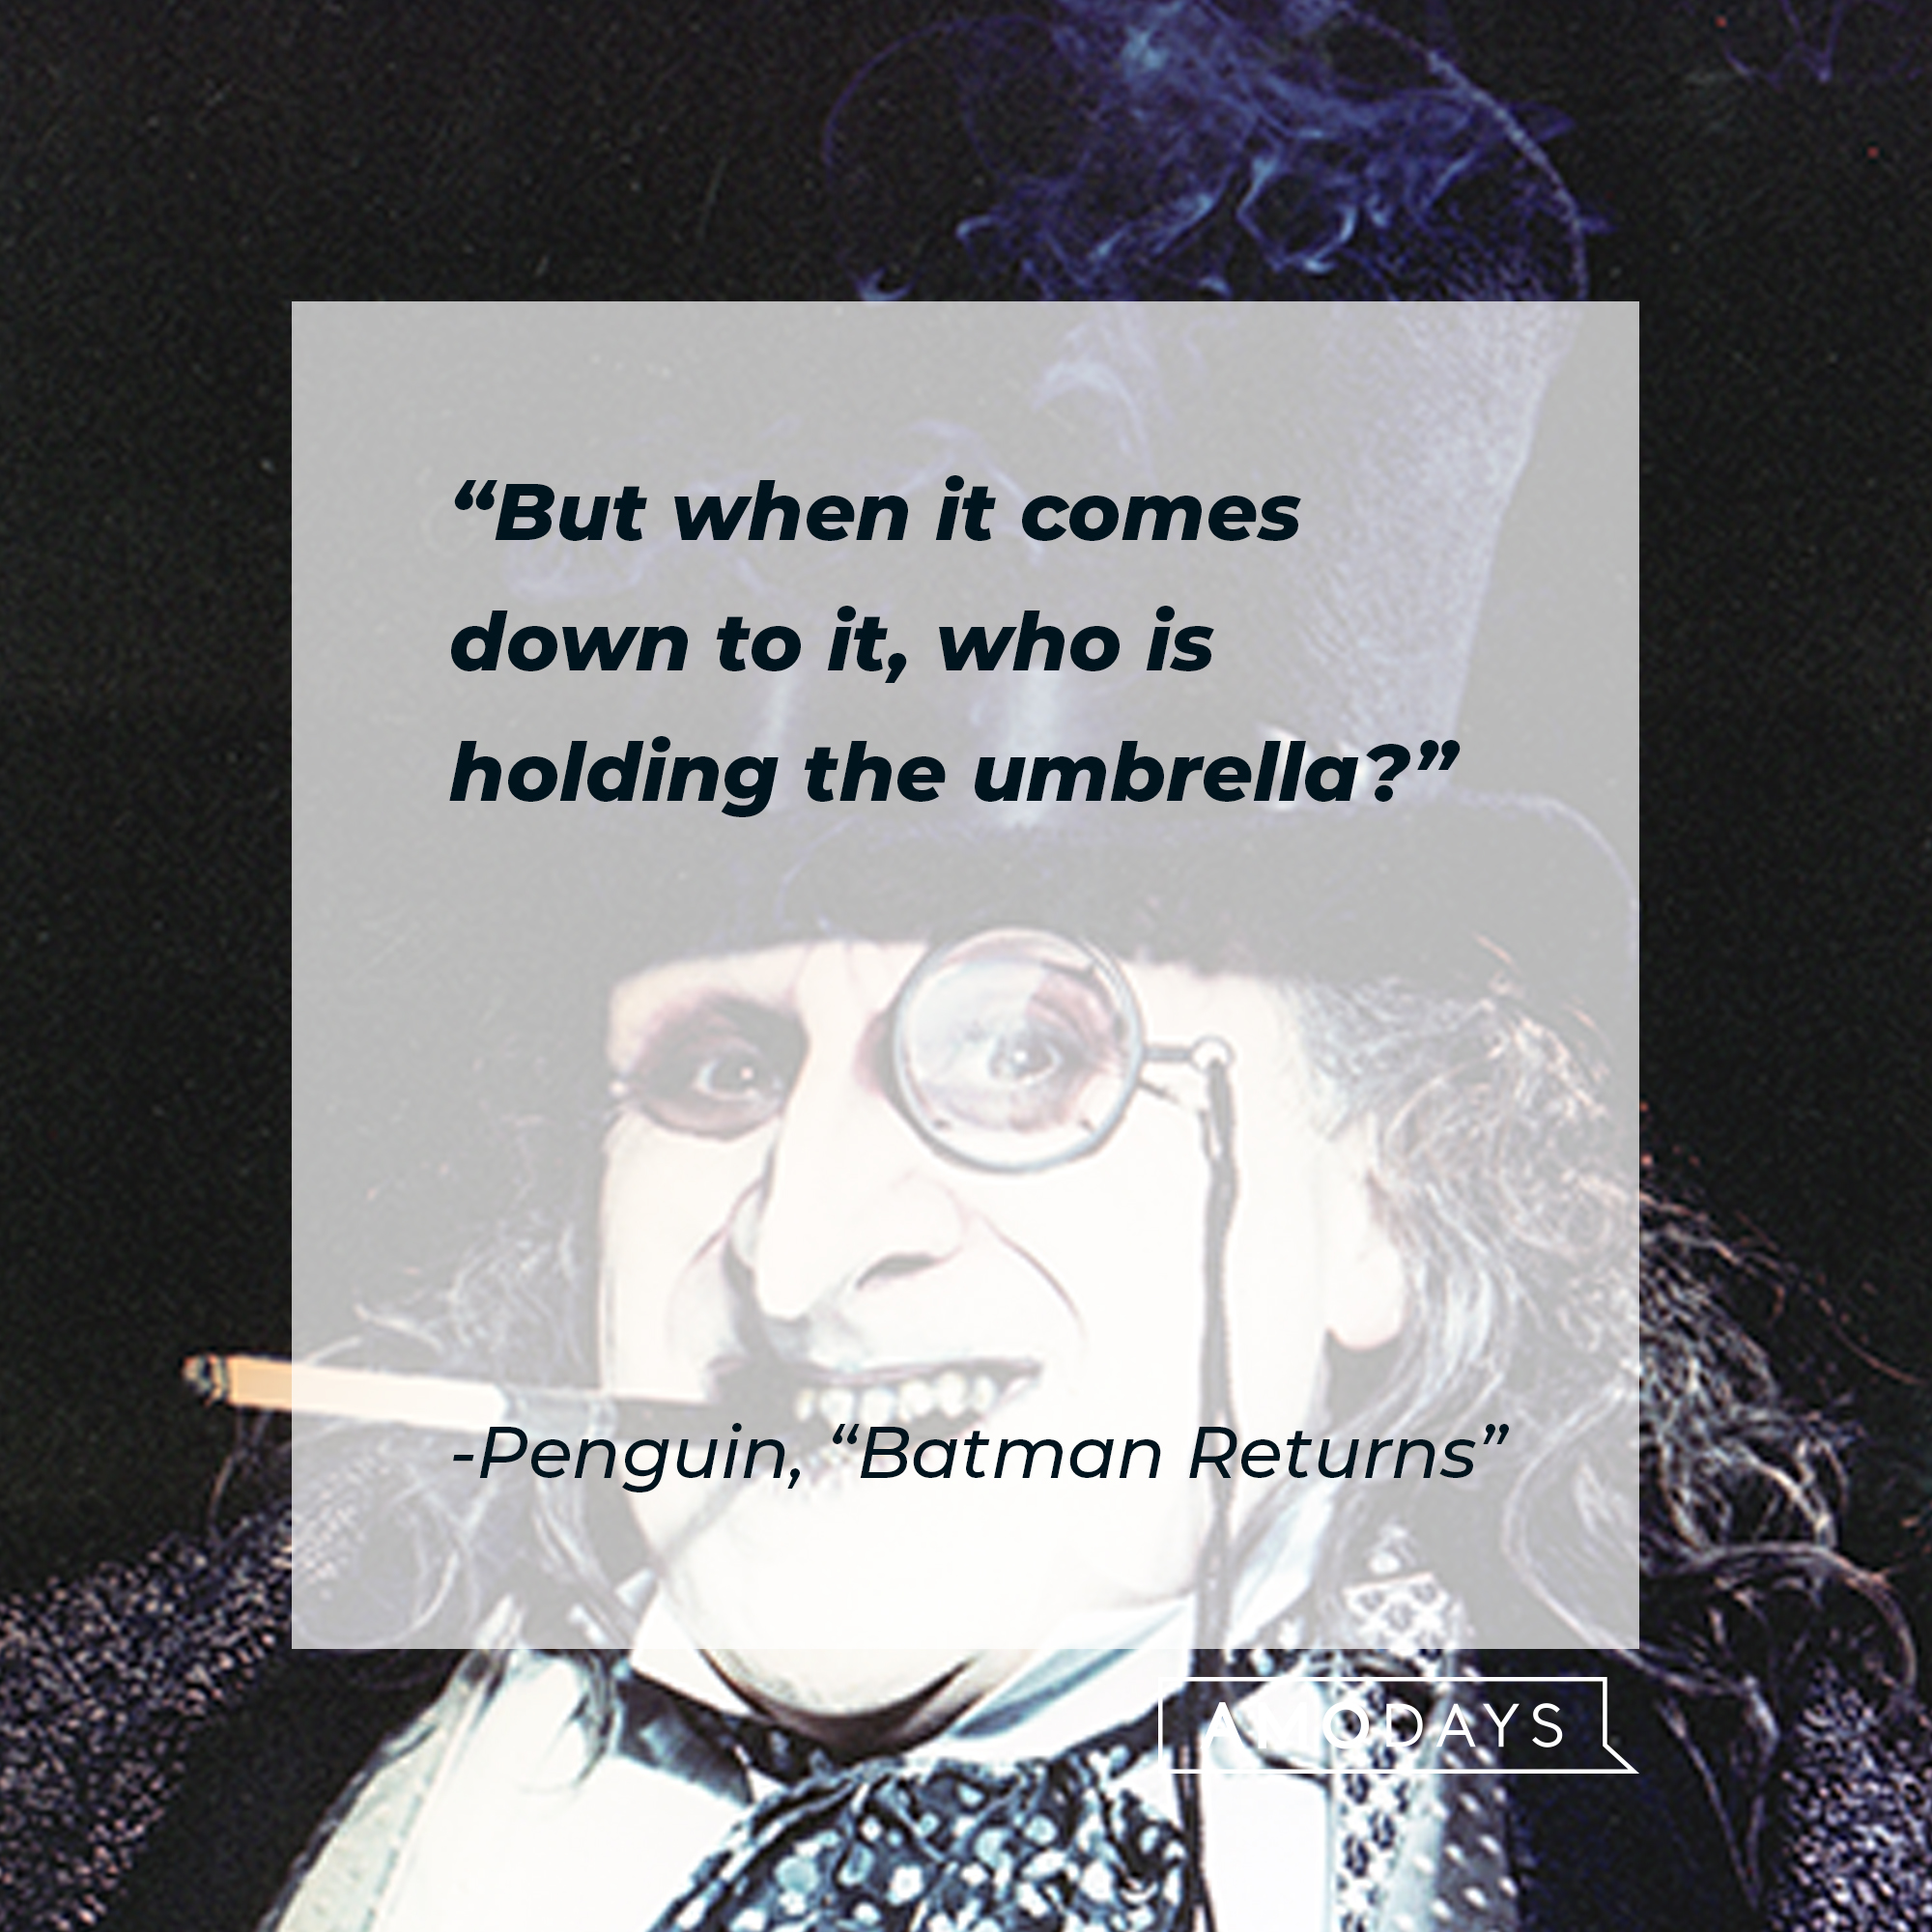 Penguin's quote from "Batman Returns" : "But when it comes down to it, who is holding the umbrella?" | Source: facebook.com/BatmanReturnsFilm